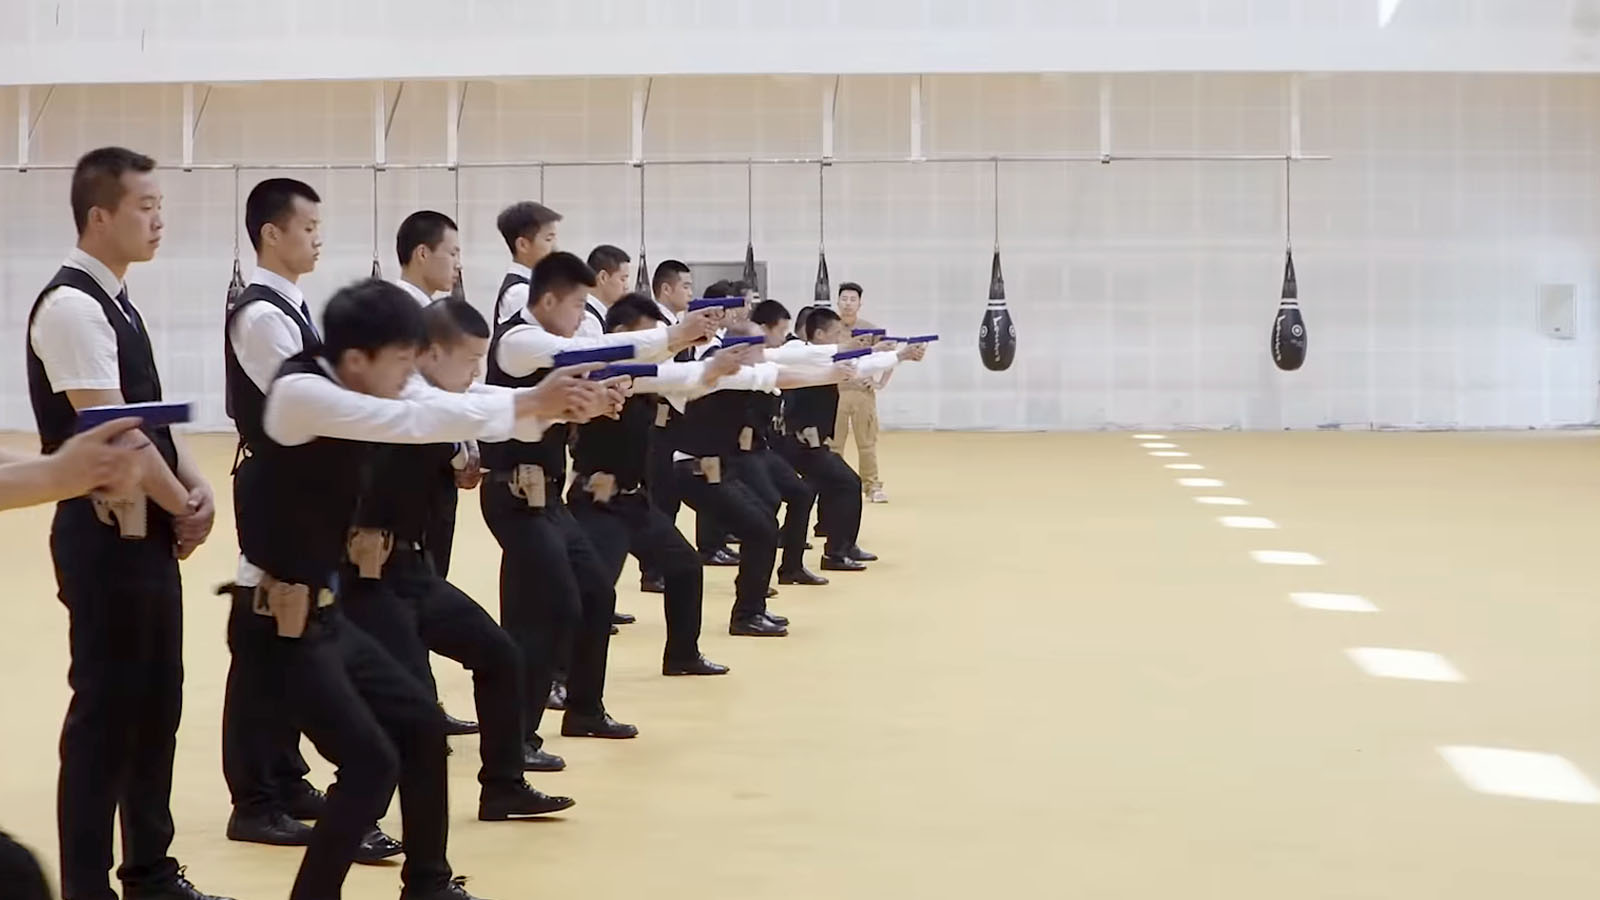 Students at a bodyguard school practice their quick draw. Image © MTV Documentary Films